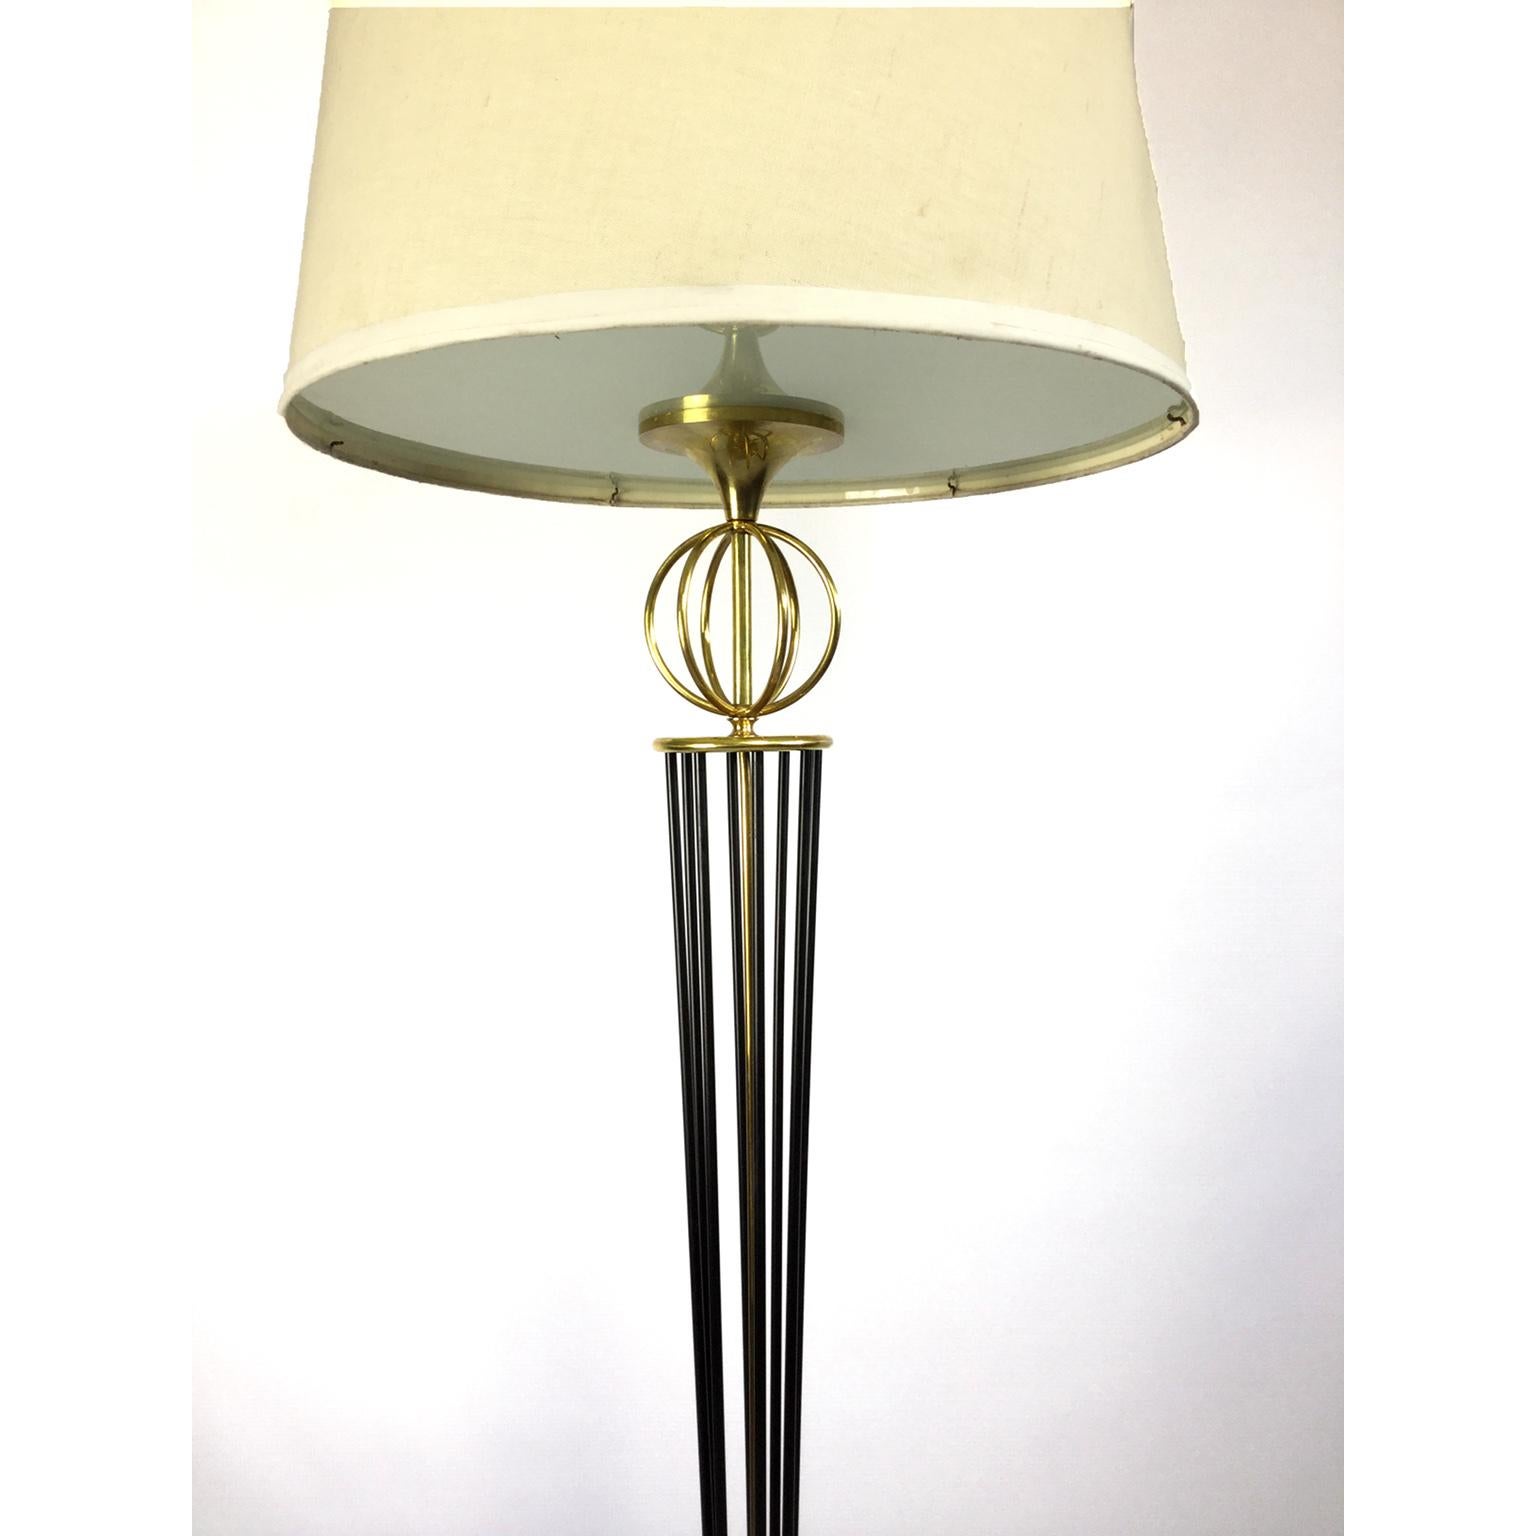 Metalwork French Brass and Glass Floor Lamp by Maison Arlus, 1950s